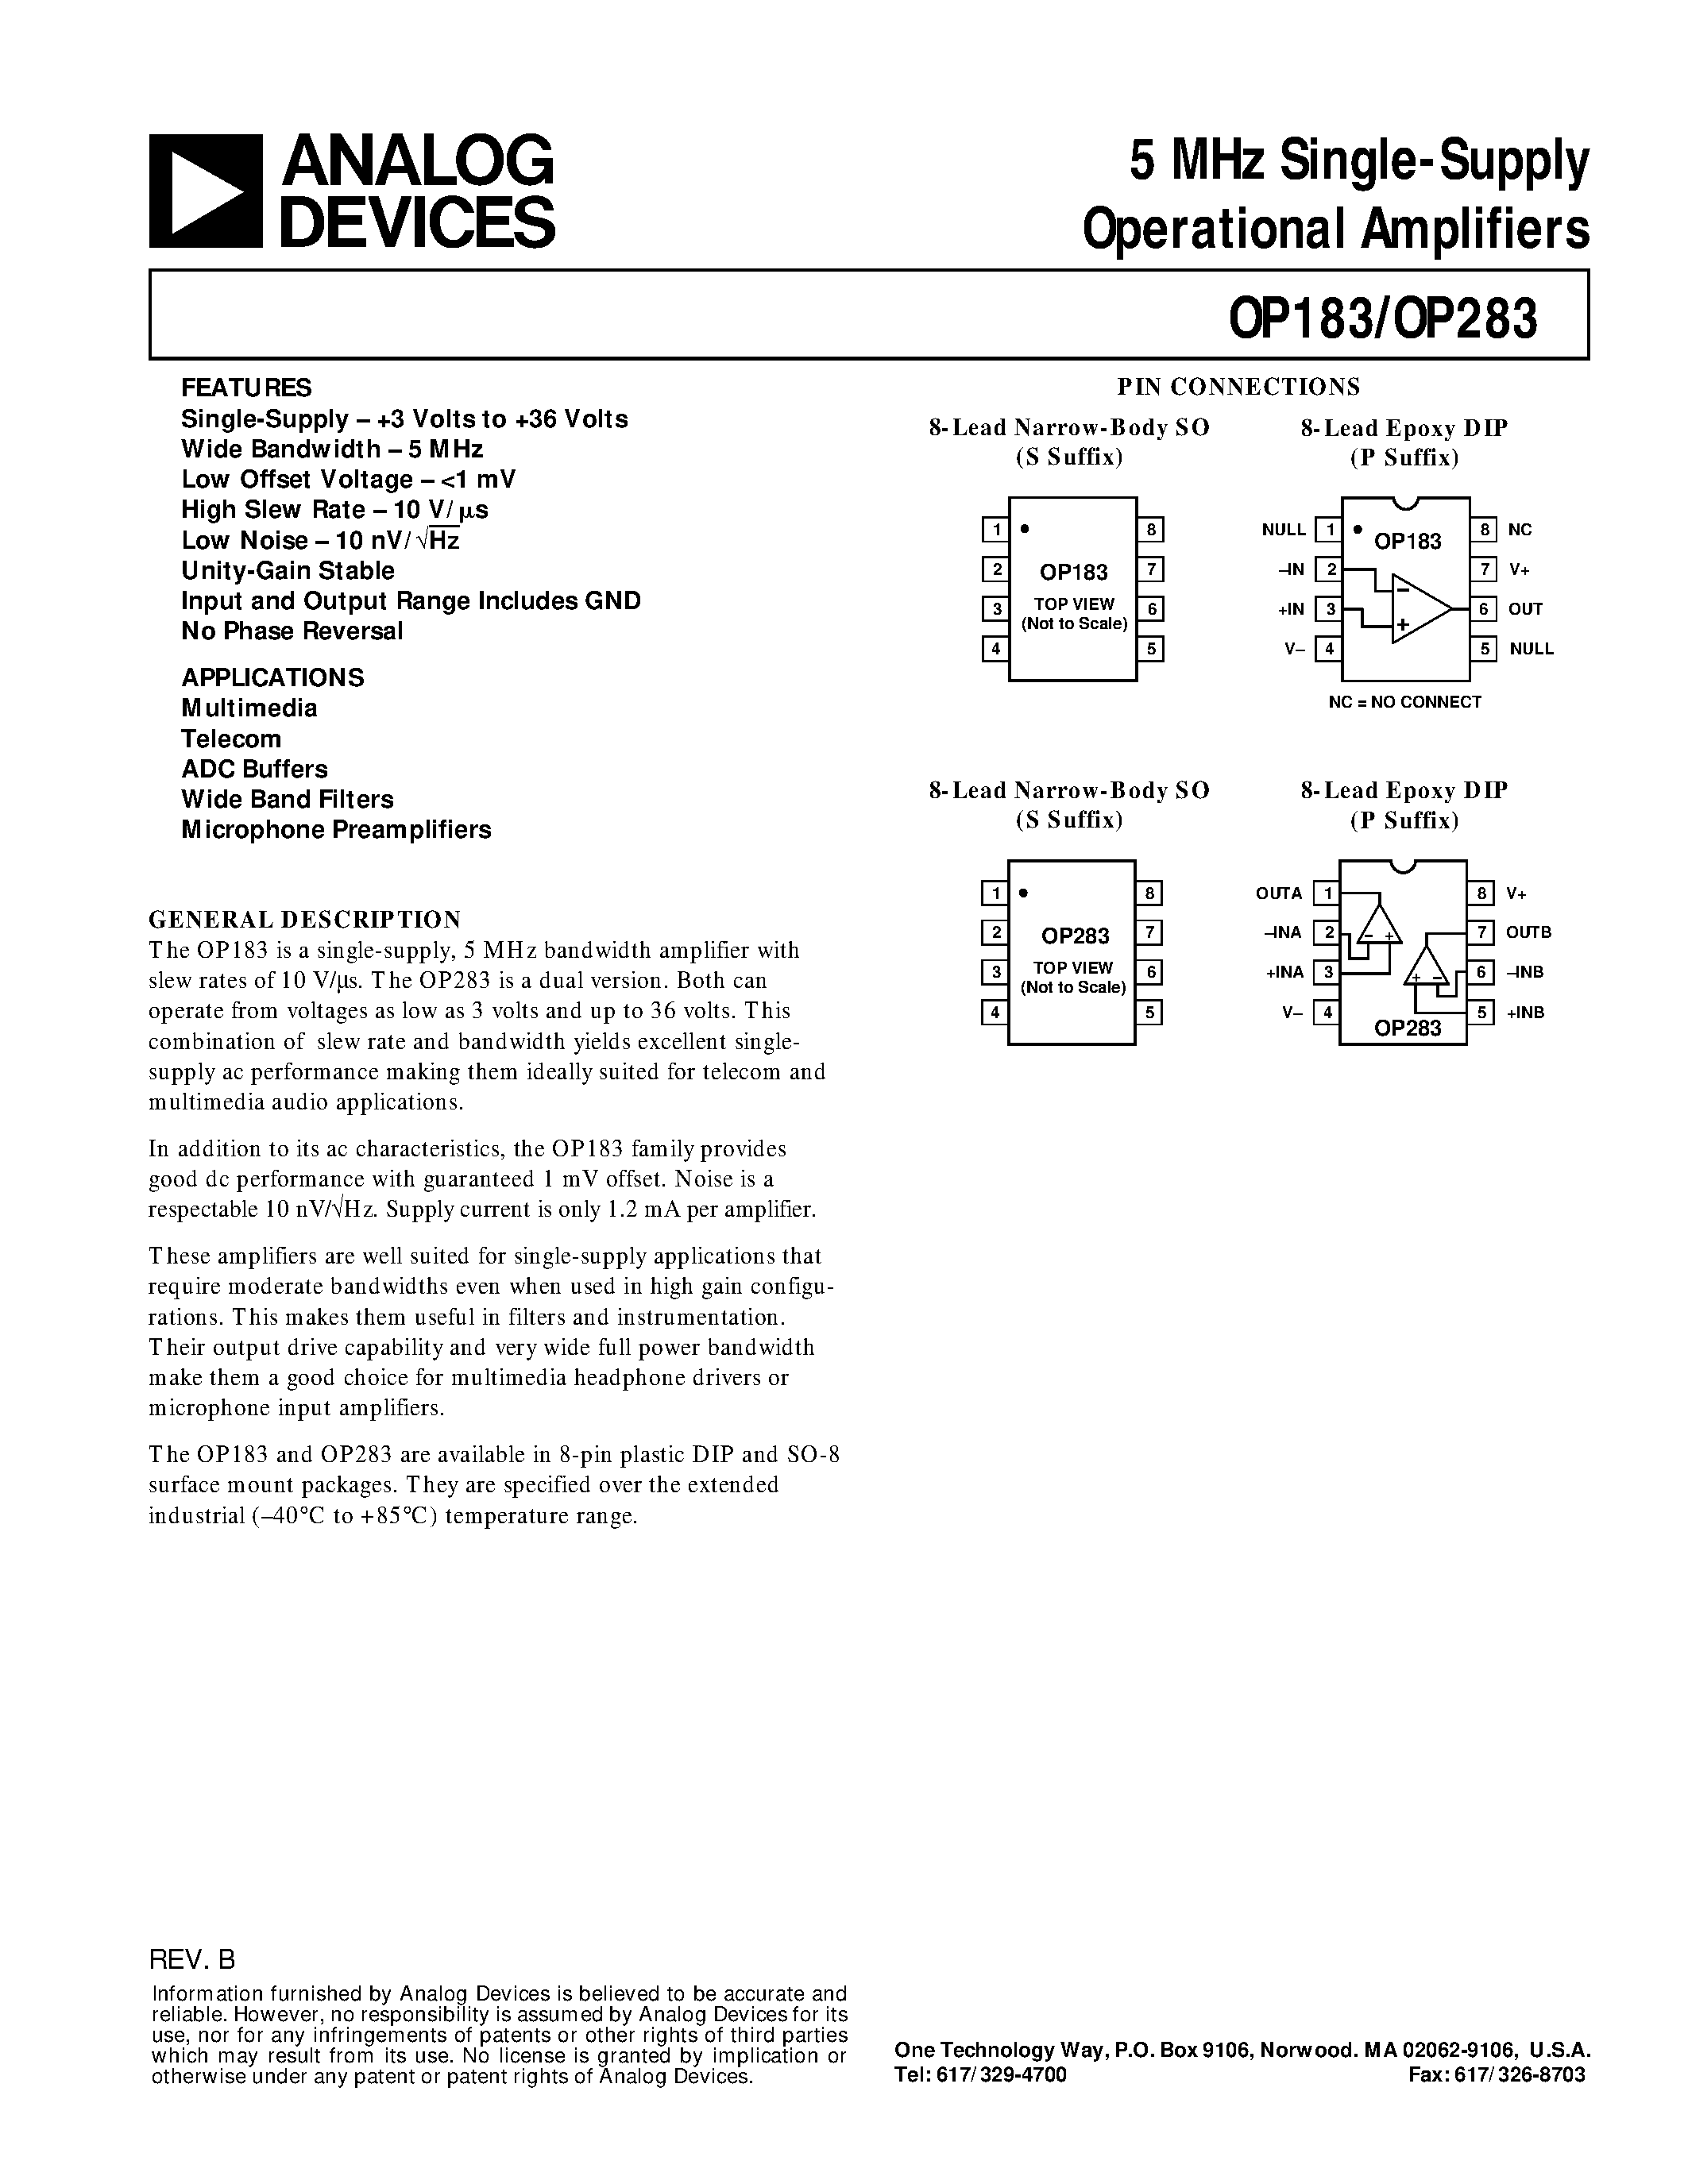 Datasheet OP283 - 5 MHz Single-Supply Operational Amplifiers page 1